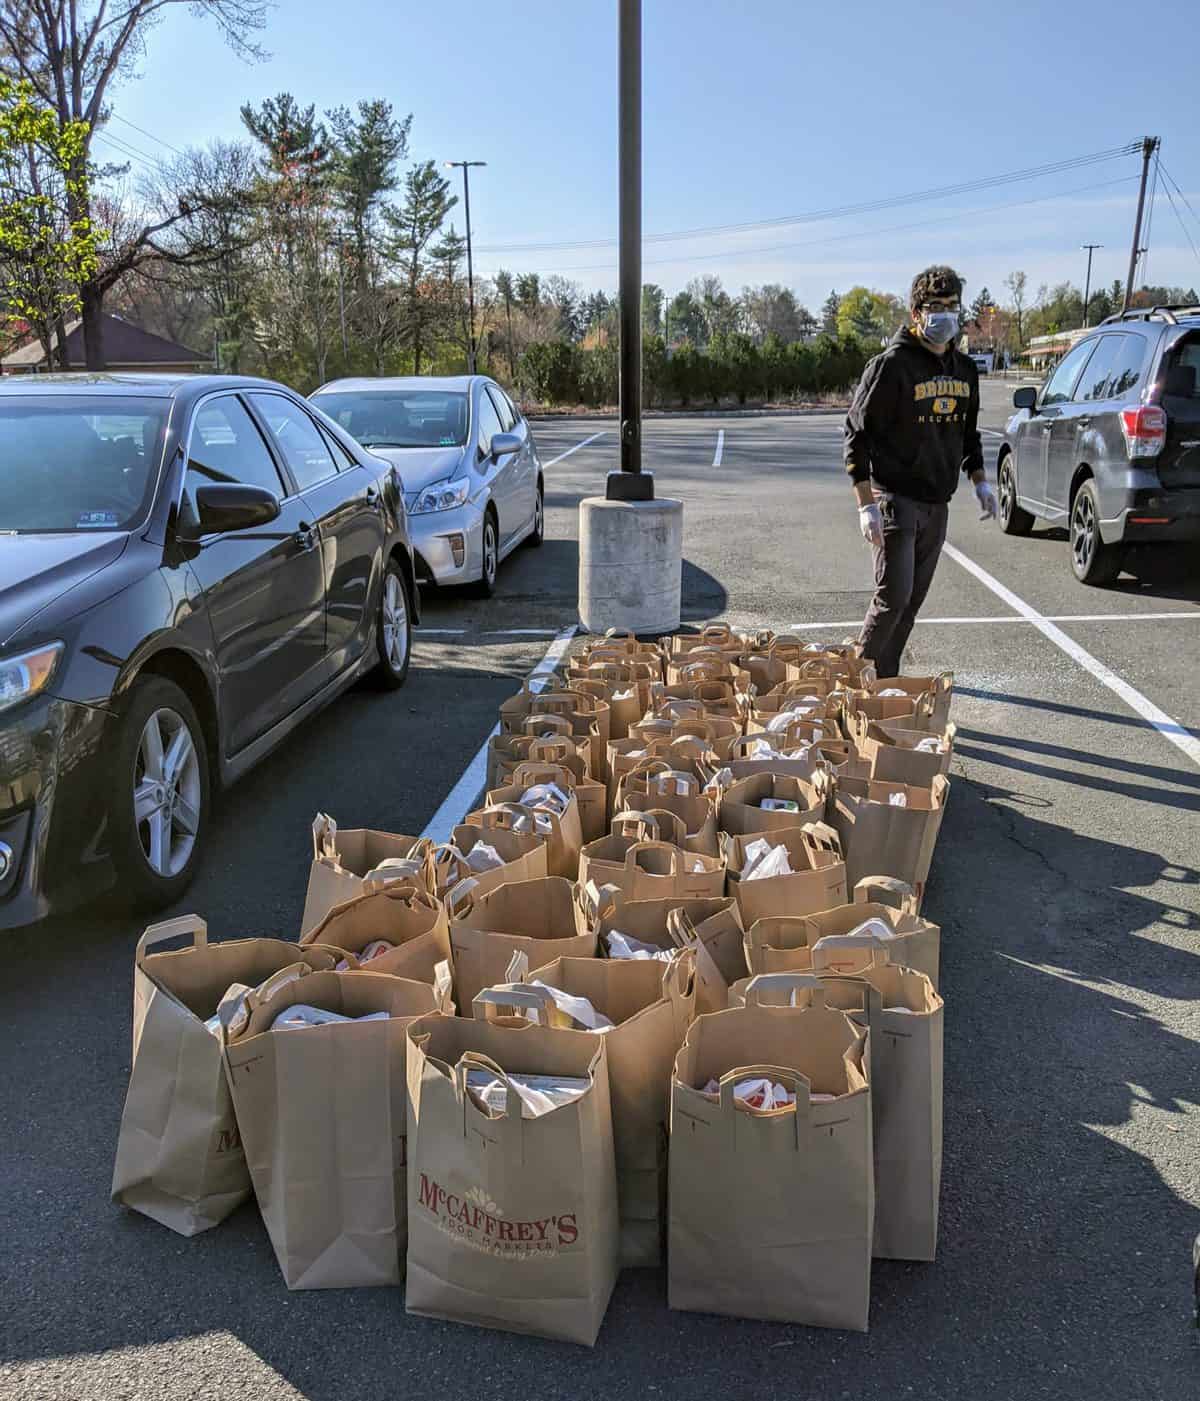 Princeton Mobile Food Pantry supplies neighbors in need with food and more during coronavirus crisis